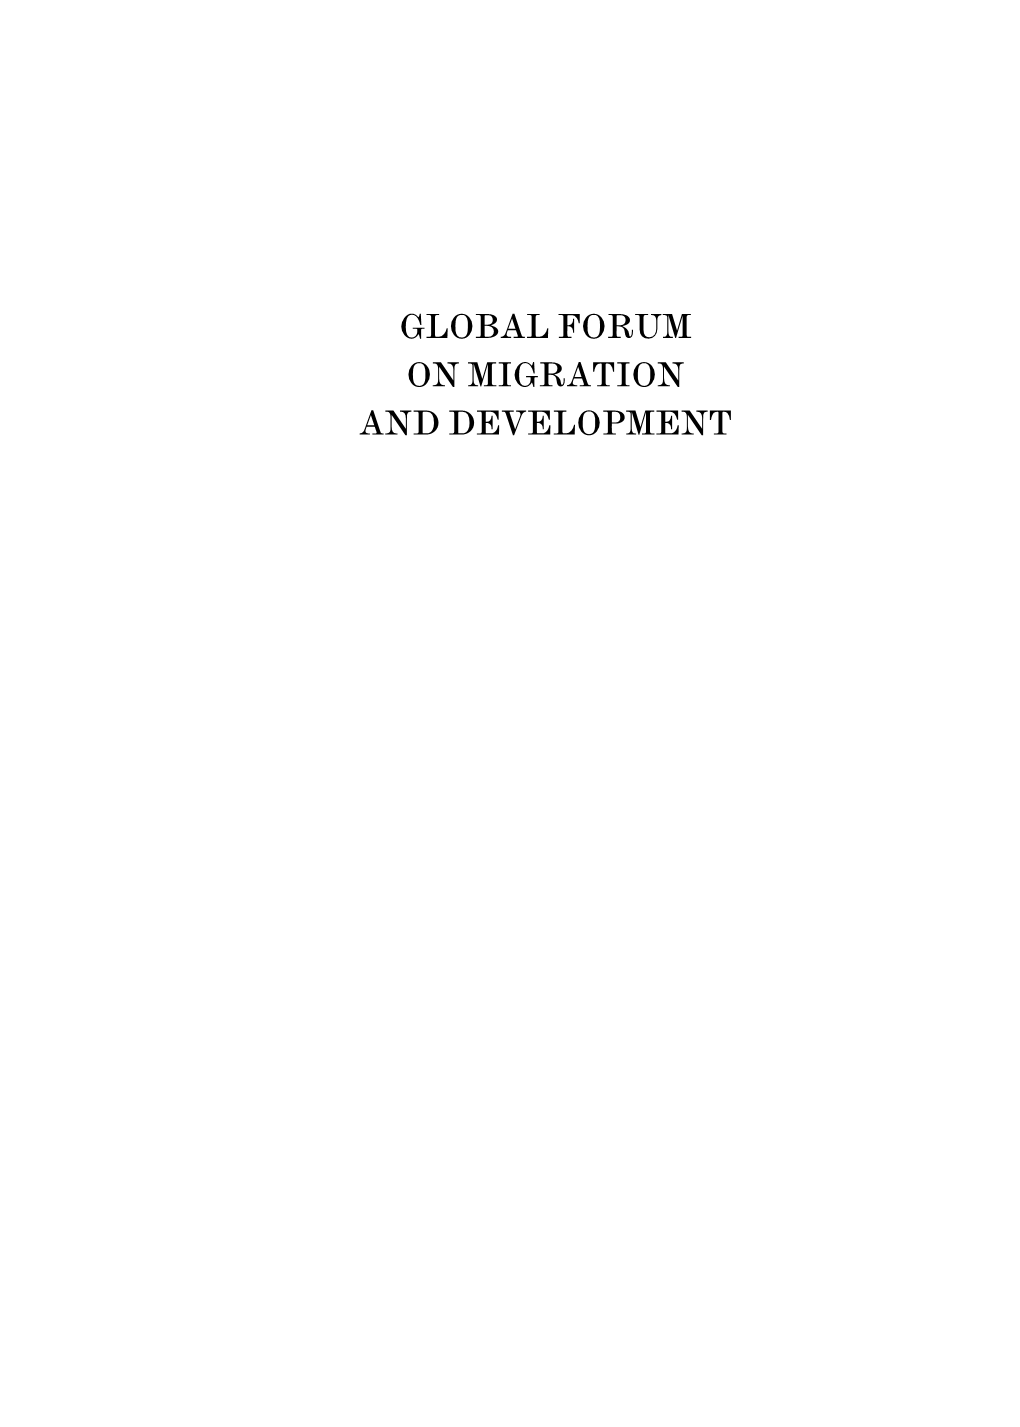 Report of the First Meeting of the GFMD. Belgium, July 9-11, 2007